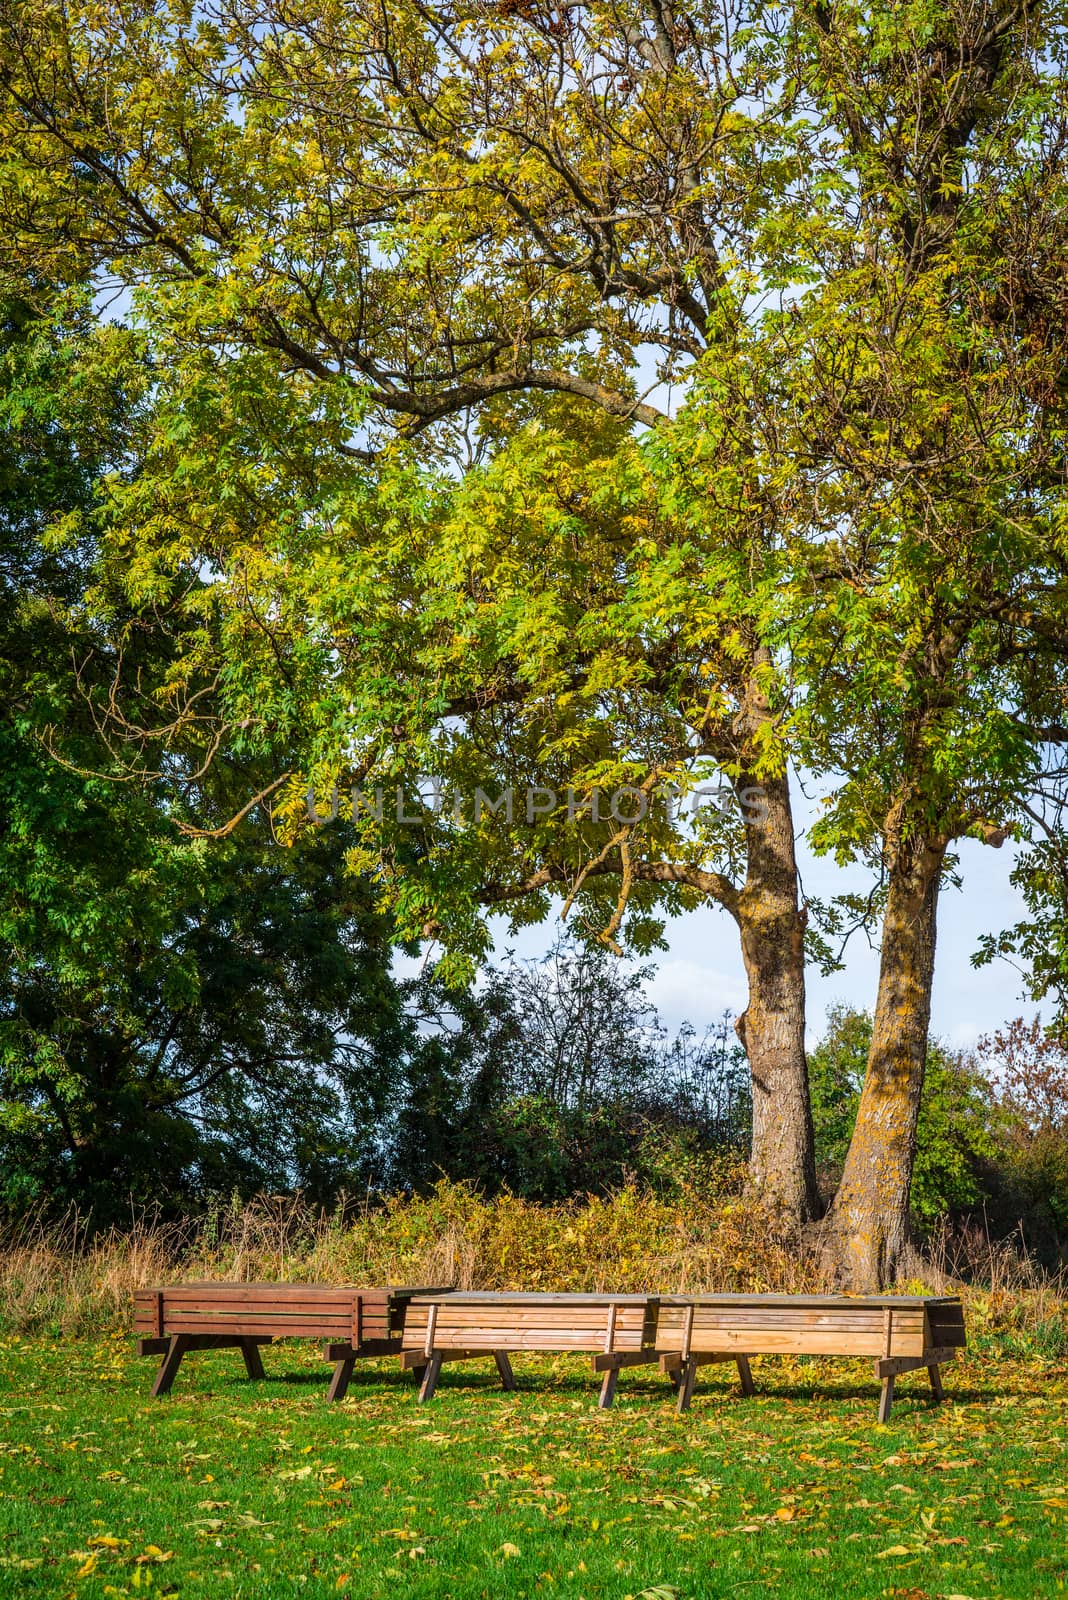 Park in the autumn with benches by Sportactive